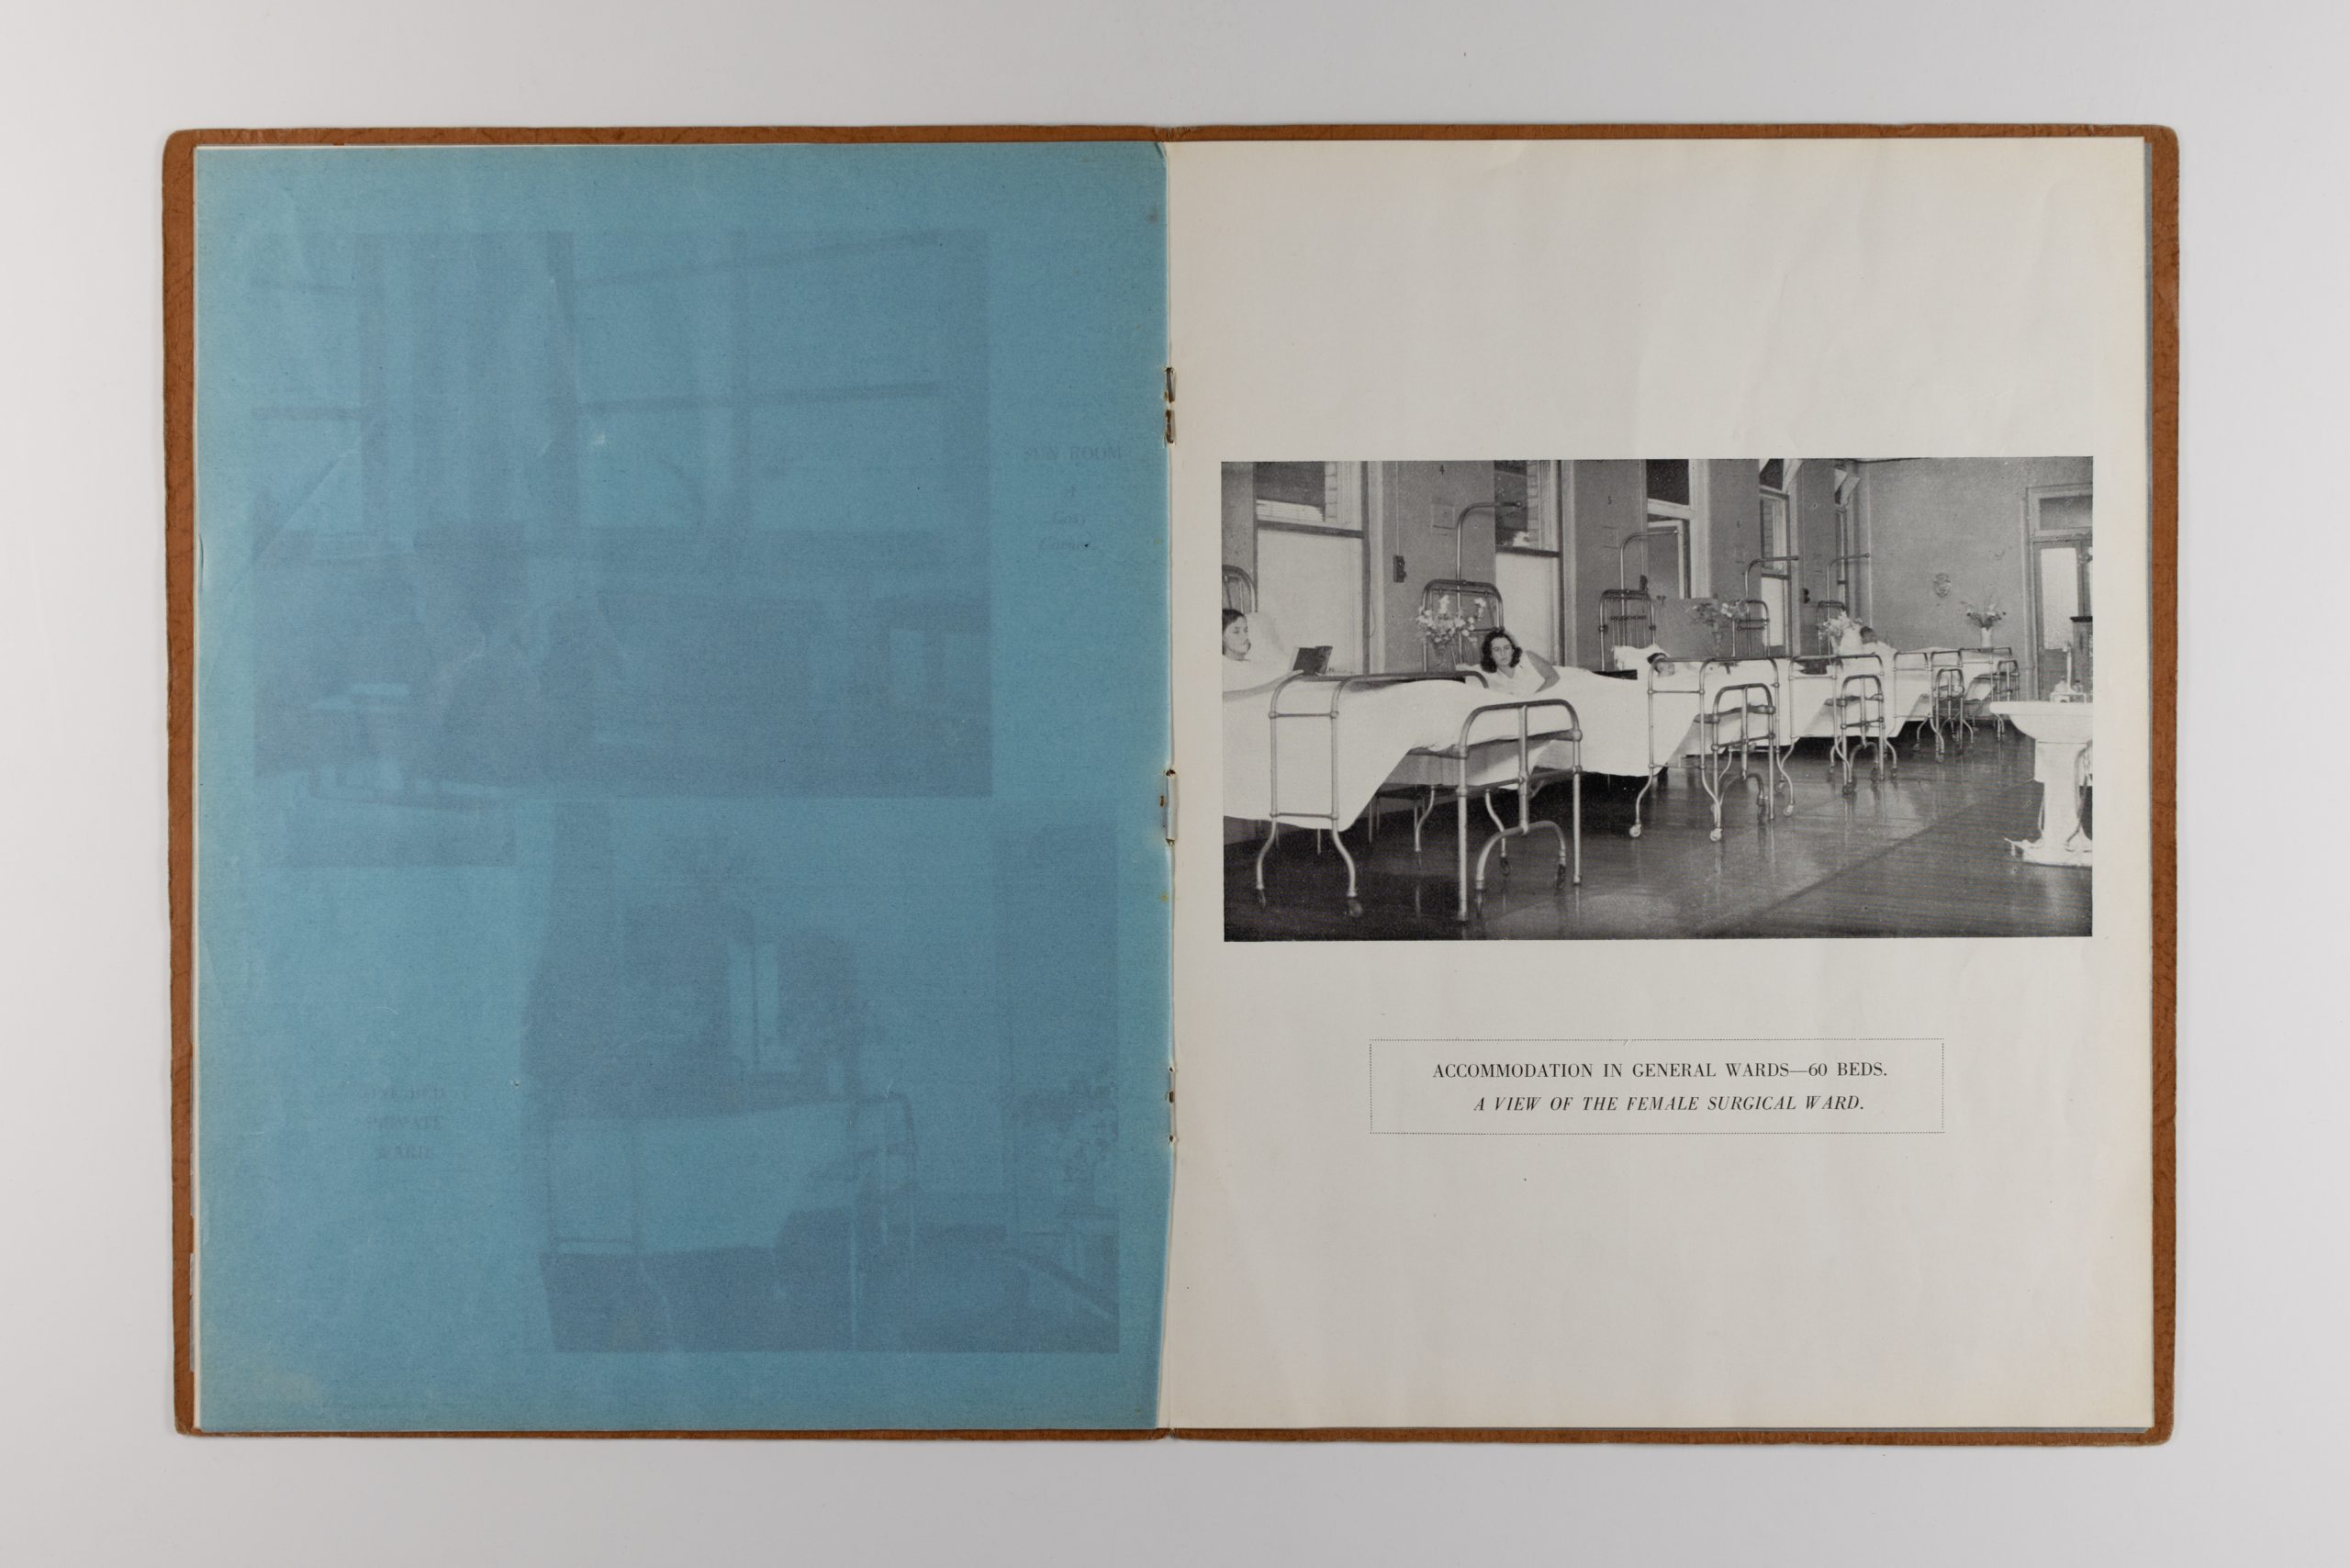 open pages of booklet, the left page is a semi-transparent blue page, the right page is an image of patients in beds within the Female Surgical Ward